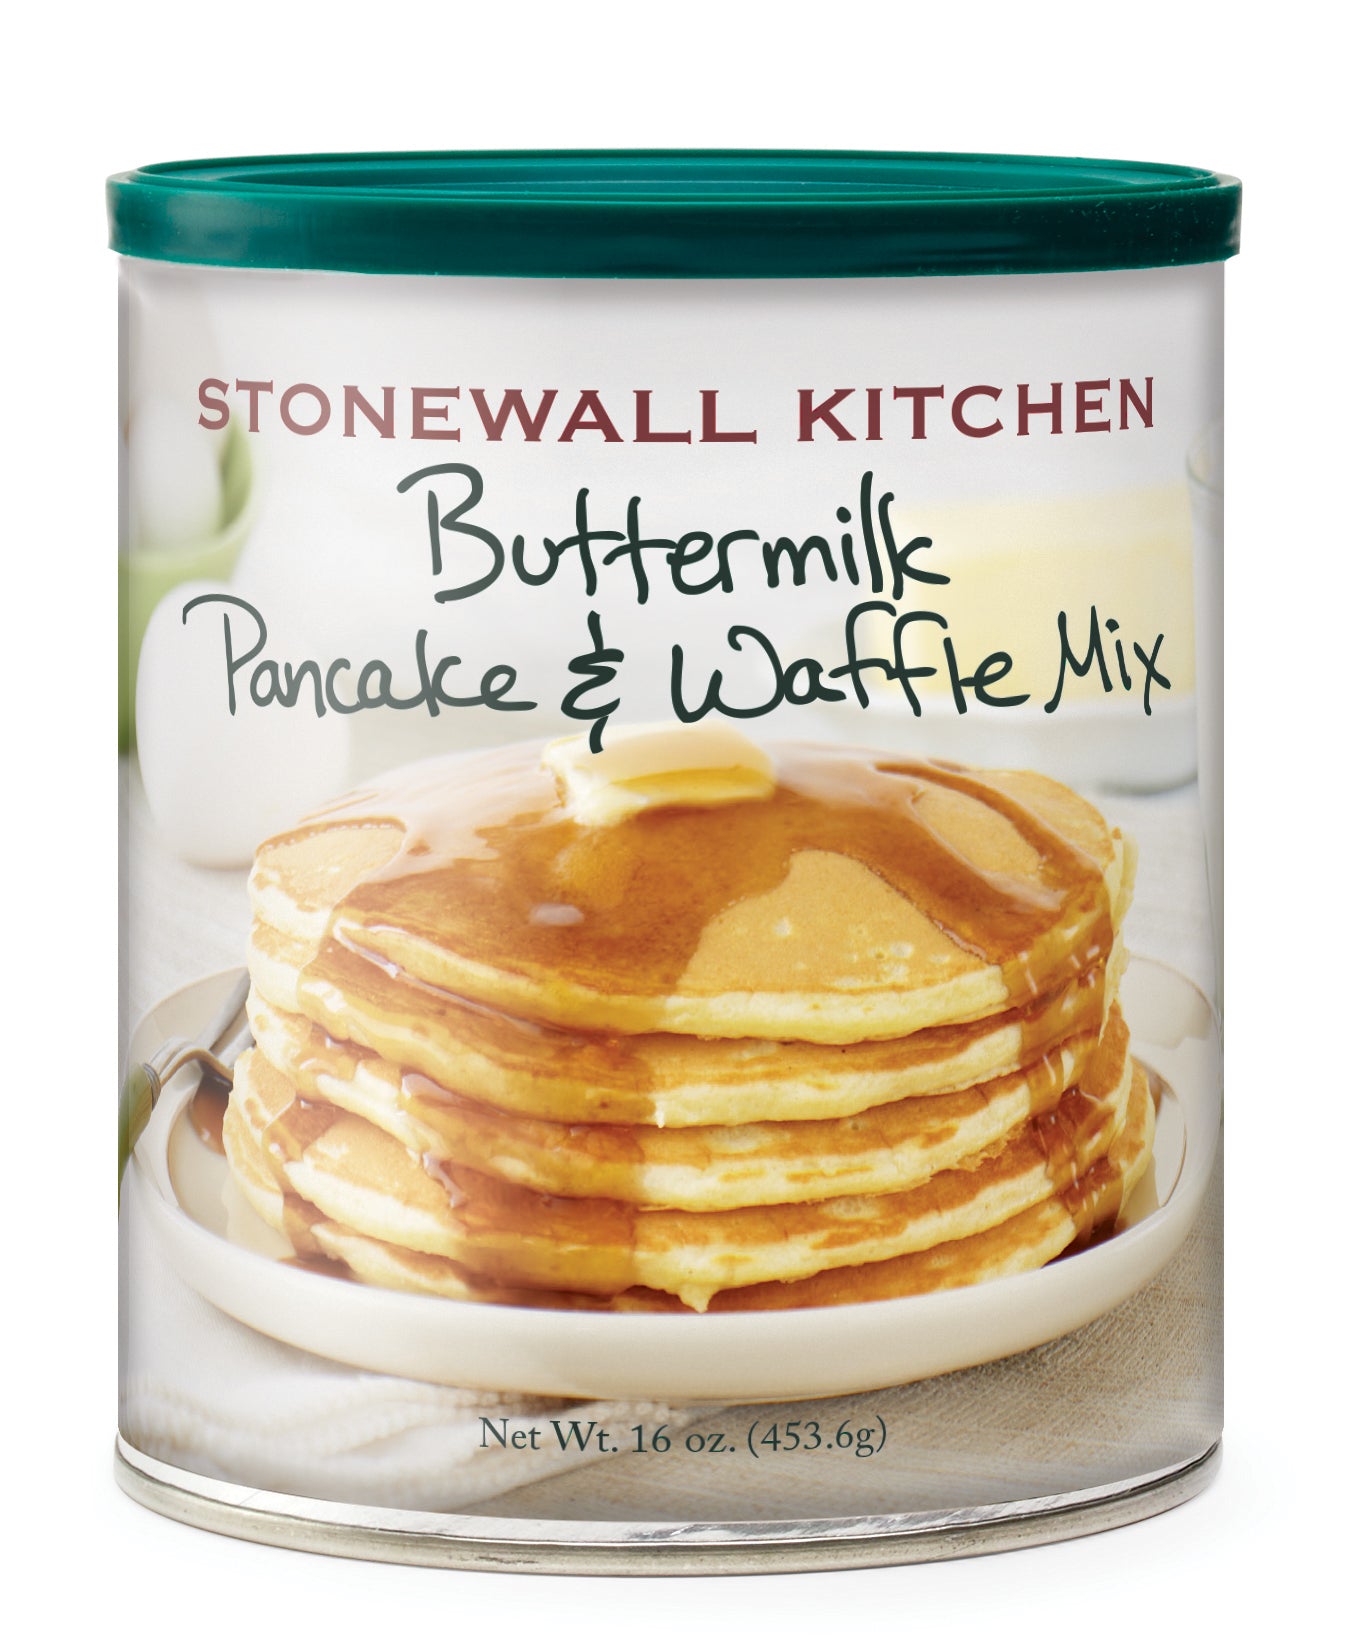 Stonewall Kitchen Buttermilk Pancake and Waffle Mix - Olive Oil Etcetera 